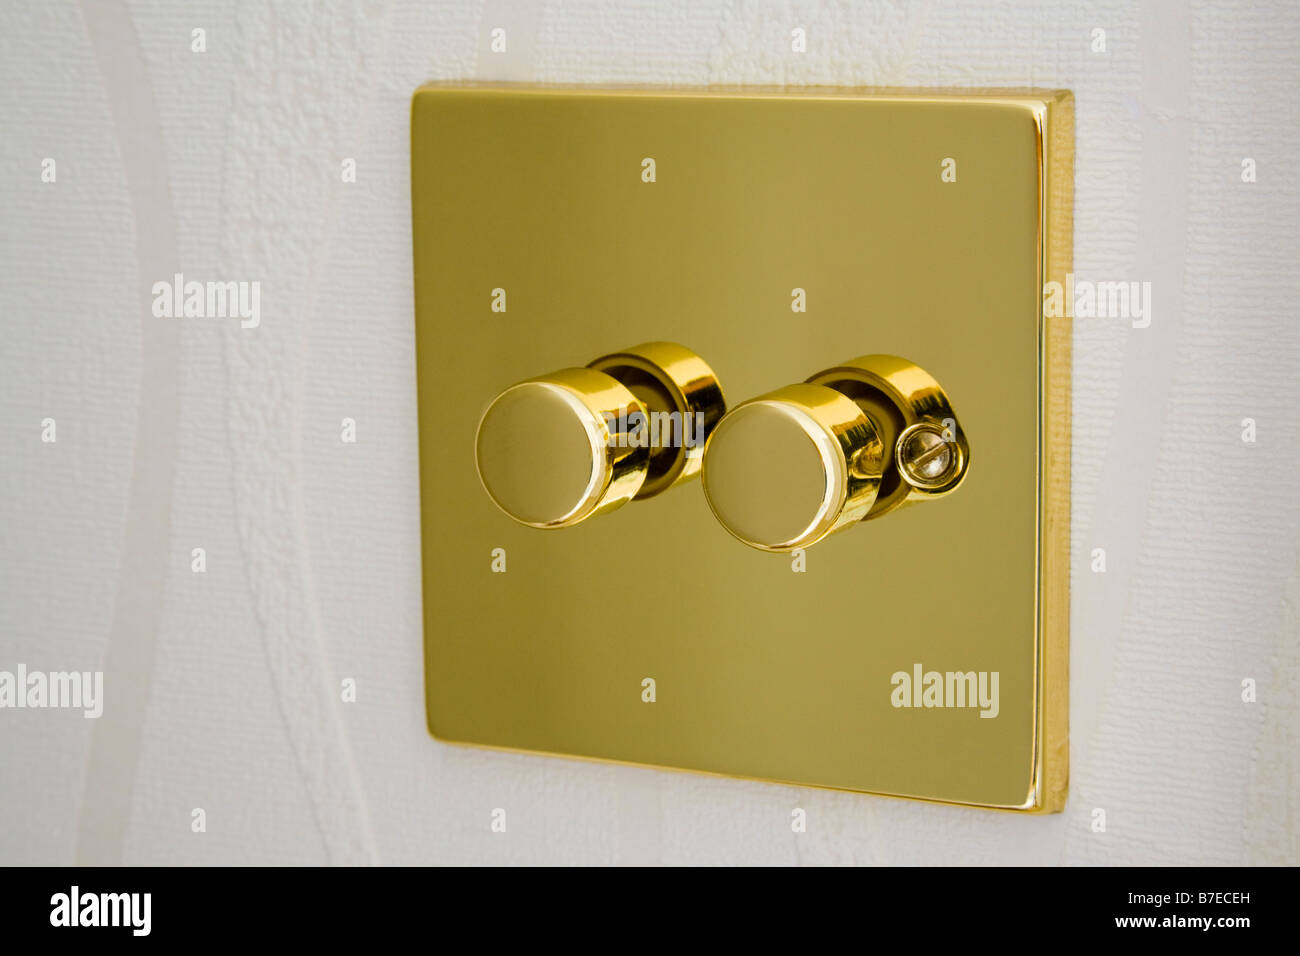 Gold metal double electric dimmer light switch on a wall. England UK Britain Stock Photo